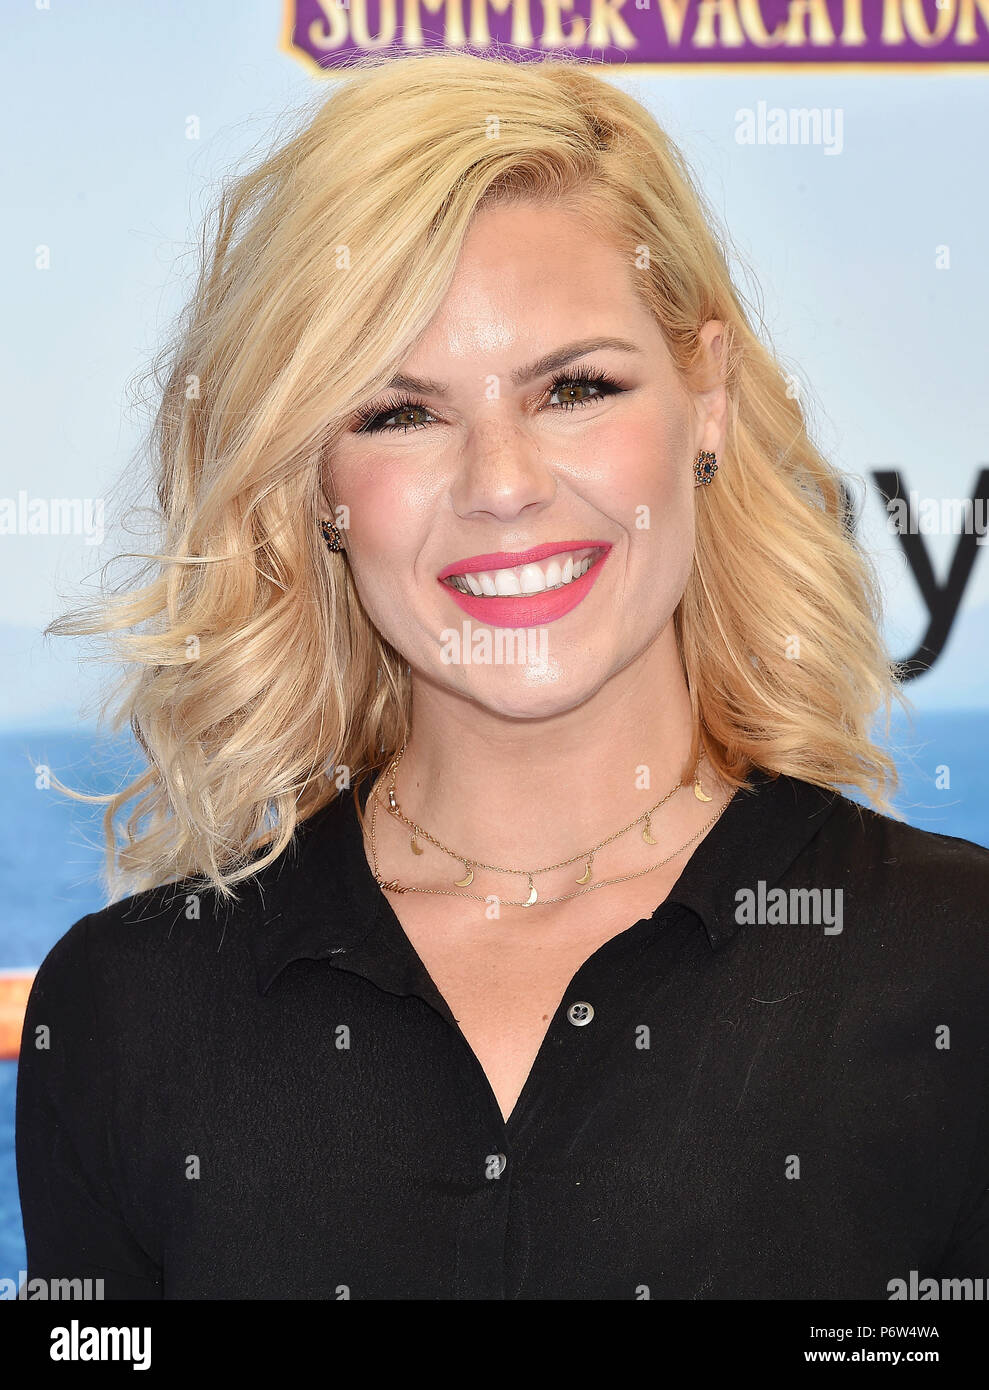 KIMBERLY CALDWELL-HARVEY at the Columbia Pictures and Sony Pictures Animation's world premiere of 'Hotel Transylvania 3: Summer Vacation' at Regency Village Theatre on June 30, 2018 in Westwood, California. Photo: Jeffrey Mayer Stock Photo